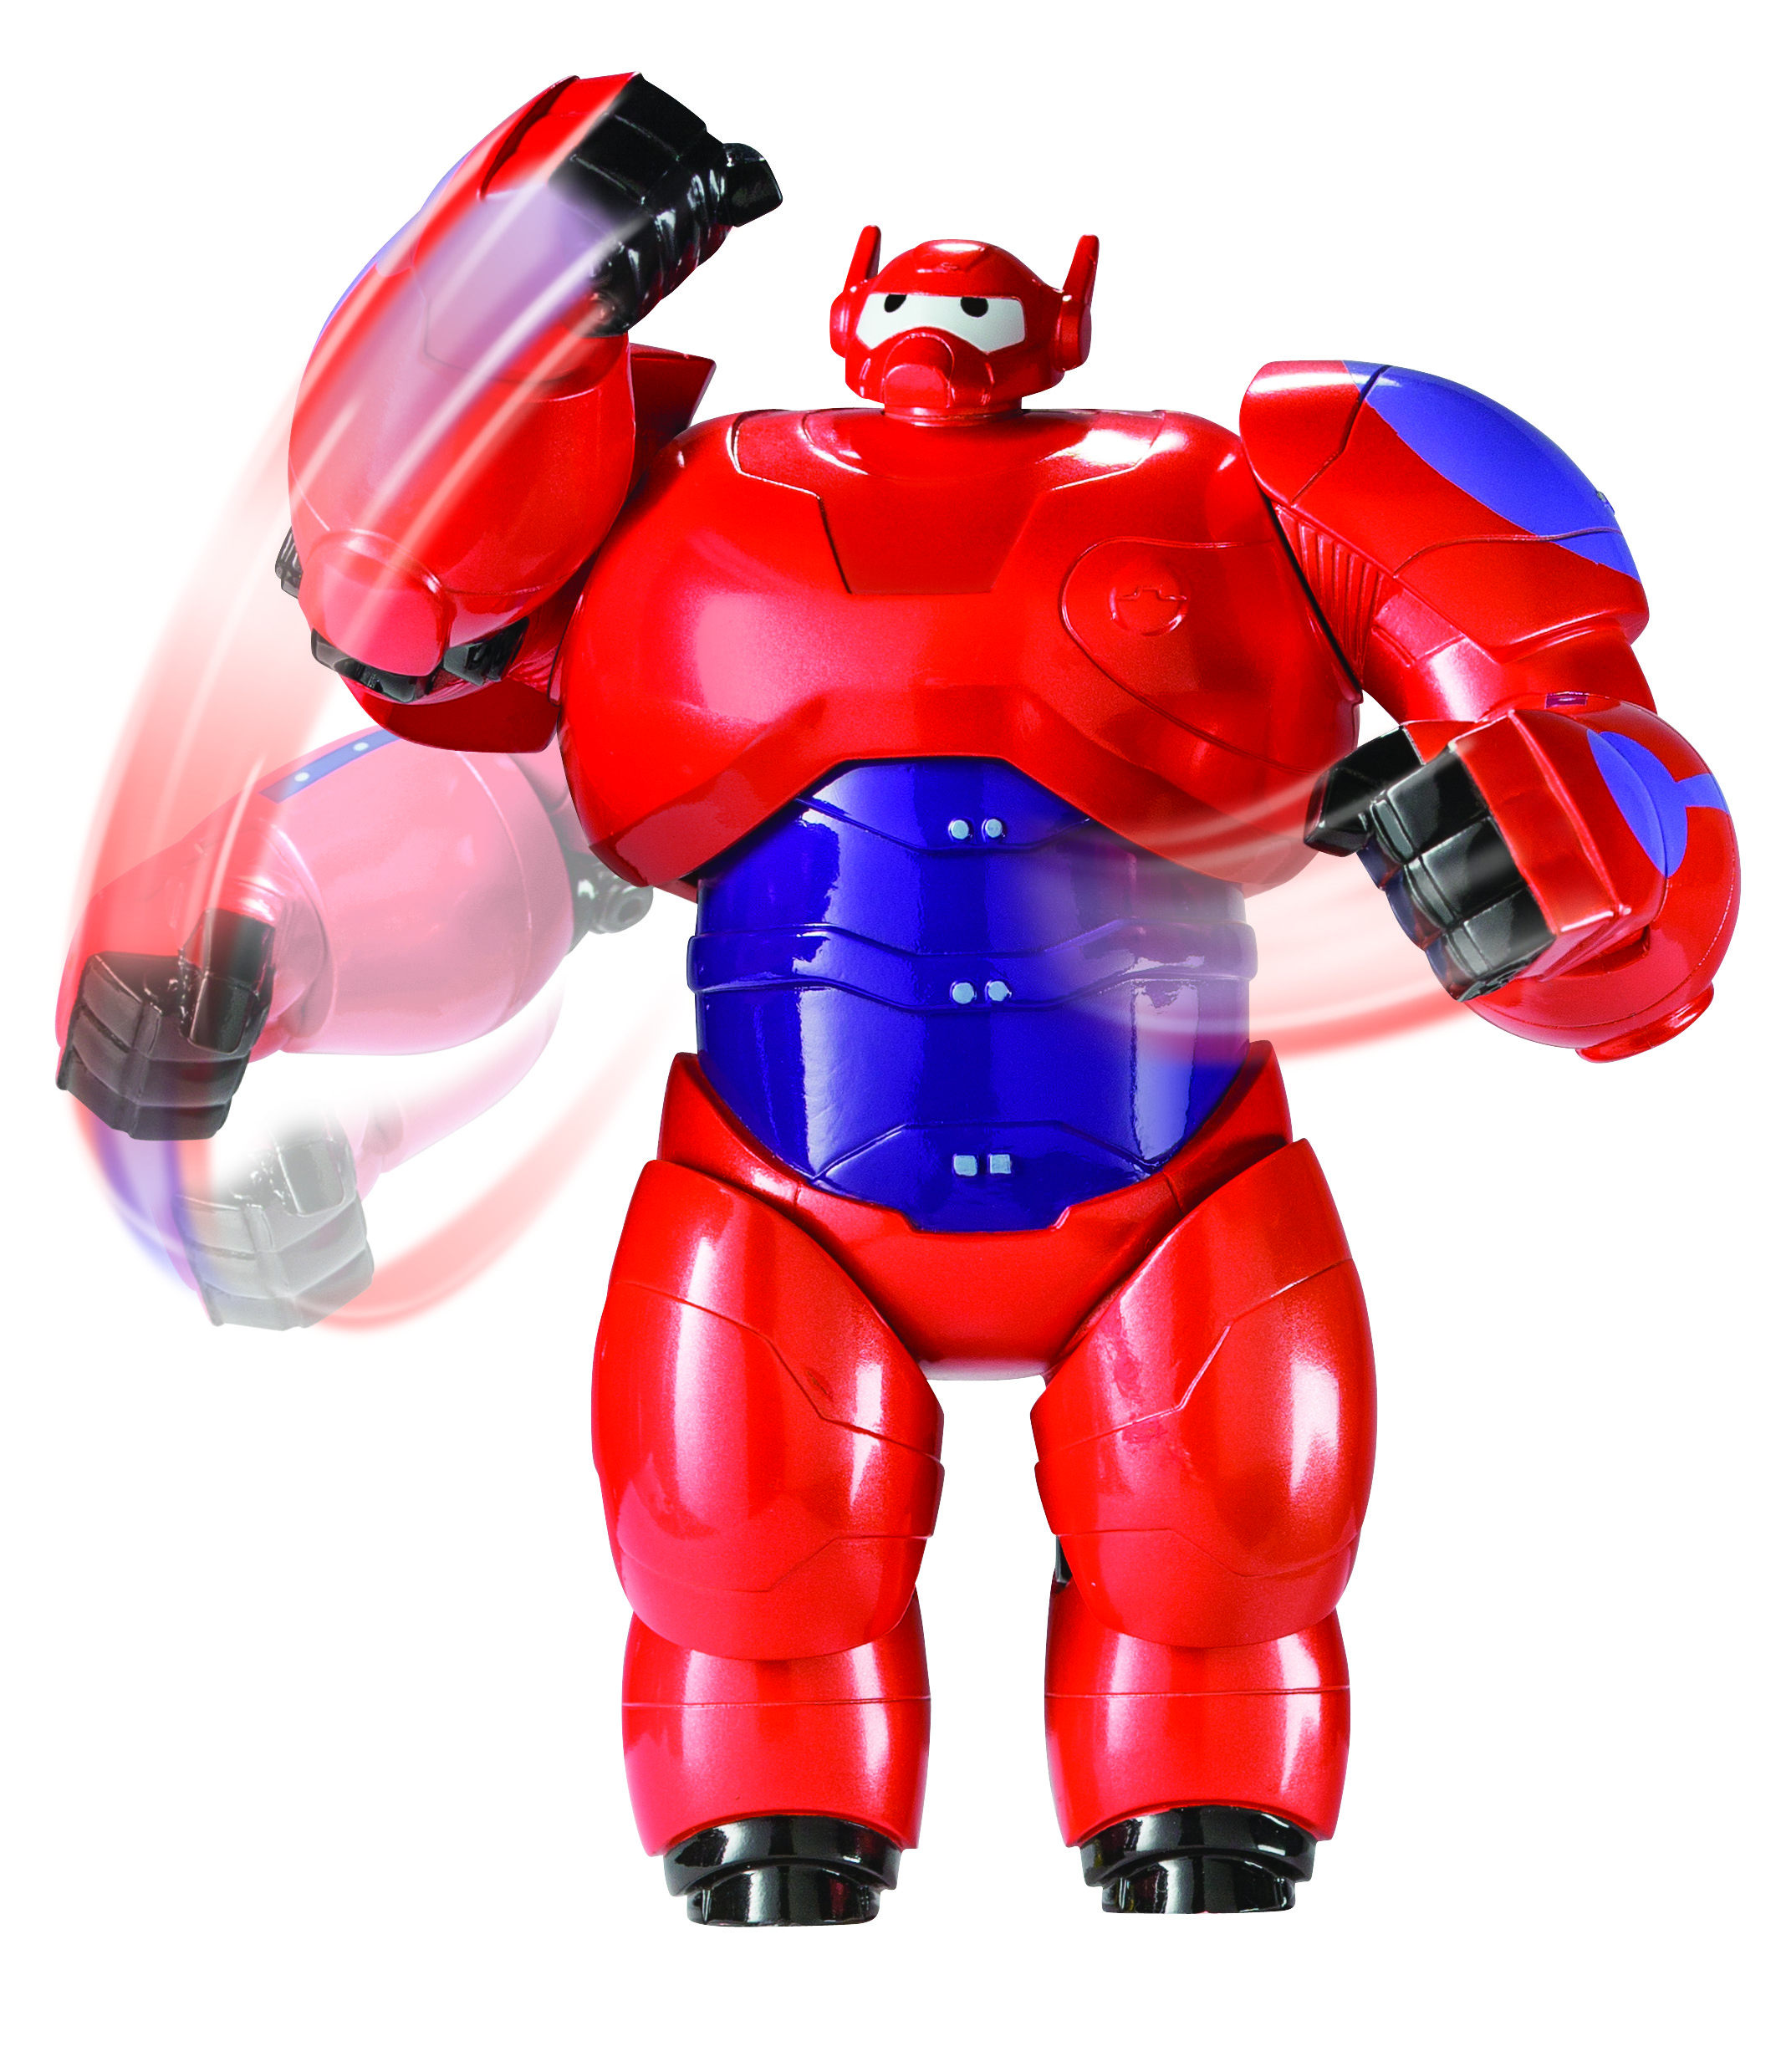 38615_38616_baymax 6 Inch Feature Figure